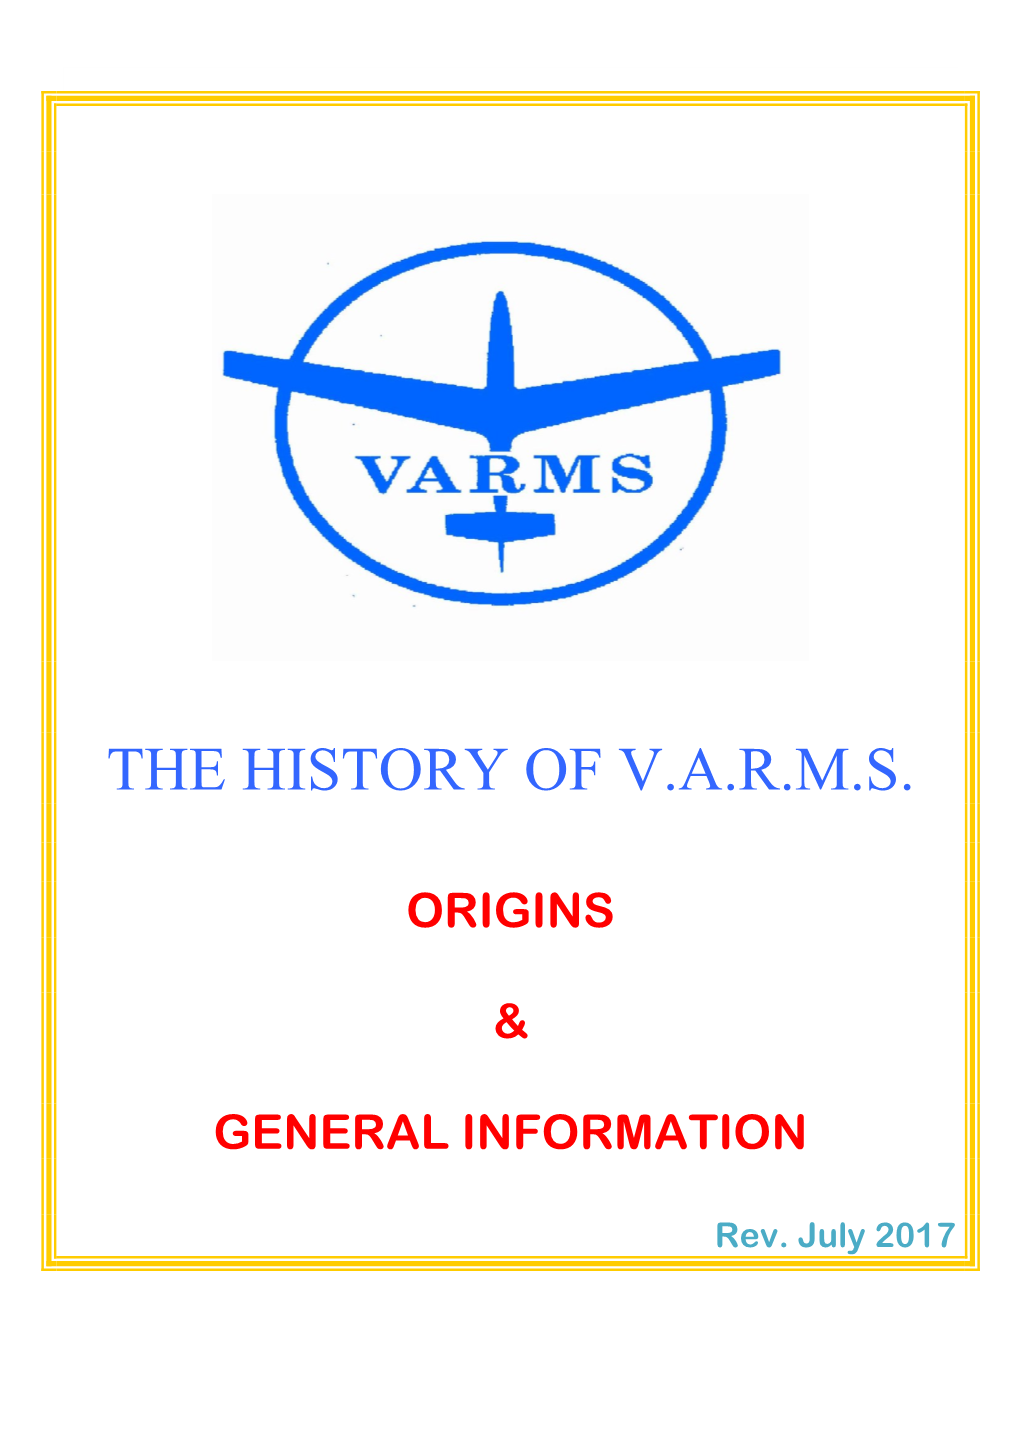 The History of V.A.R.M.S